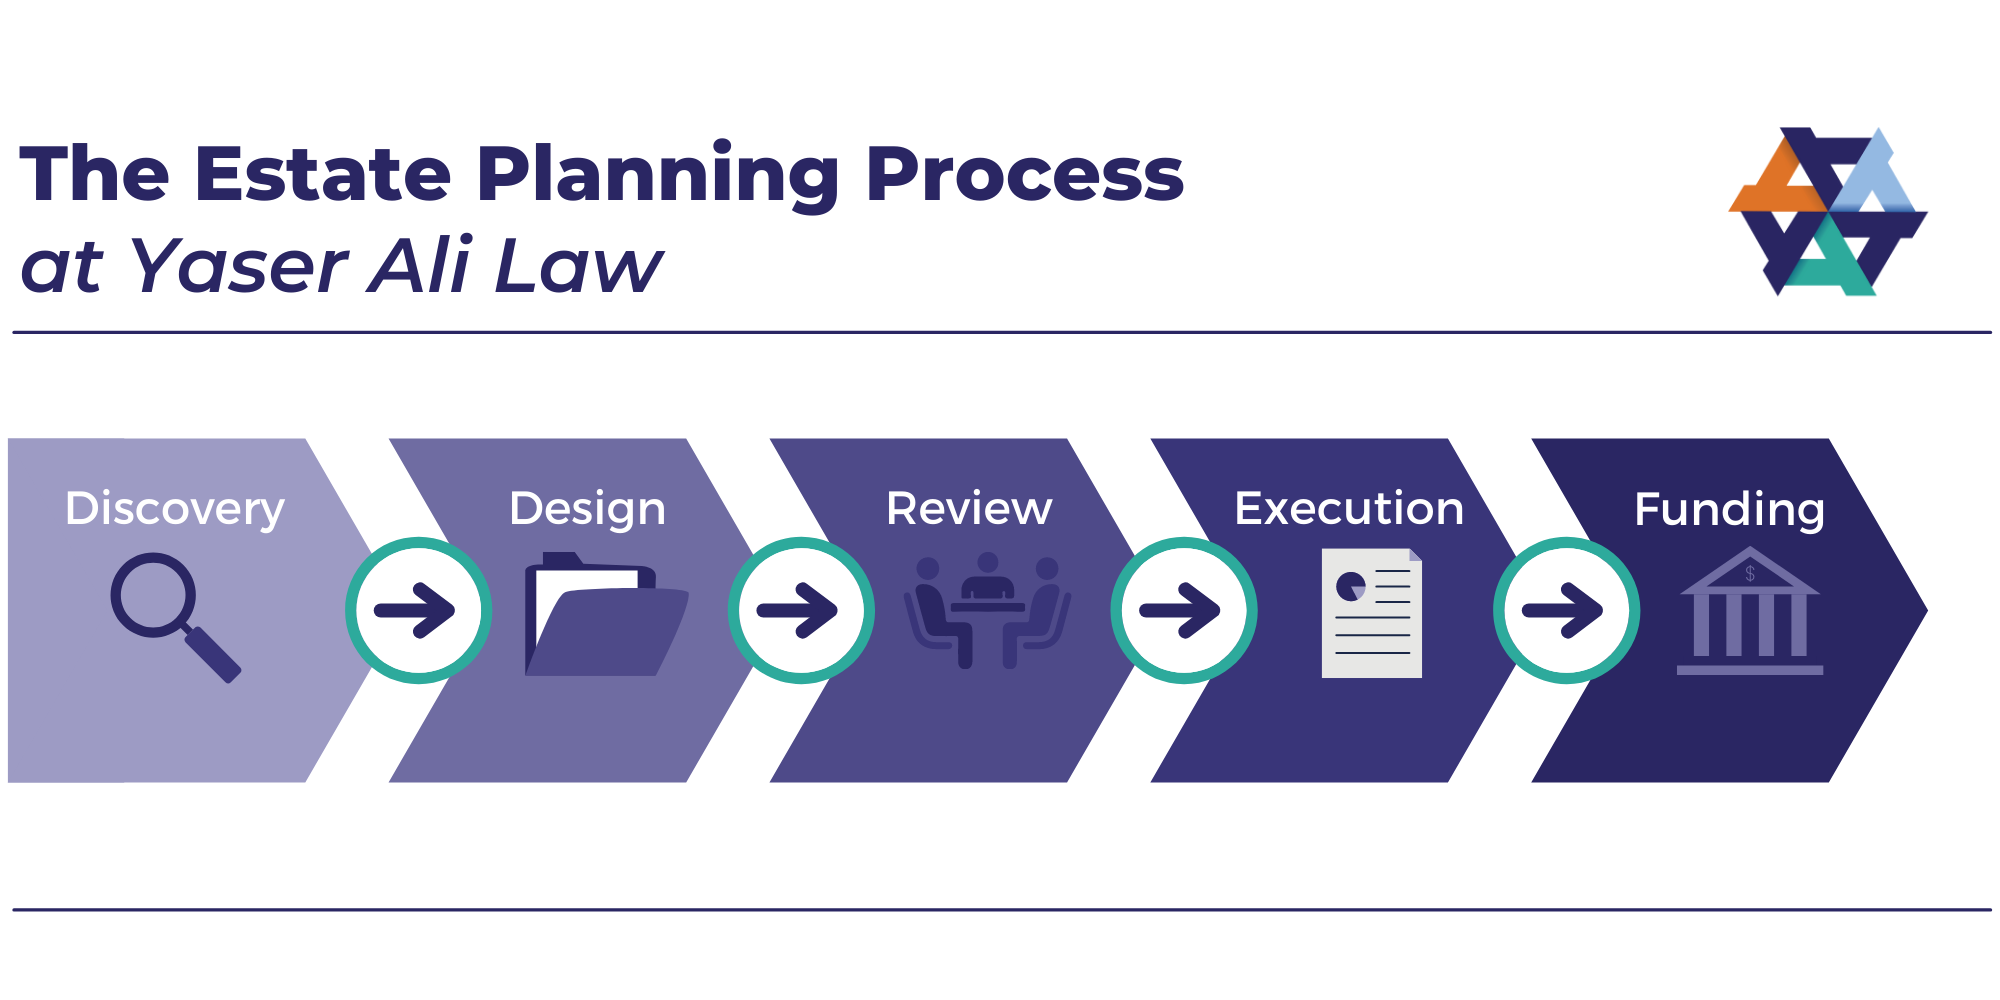 Estate planning process diagram describing discovery, design, review, execution, and funding.